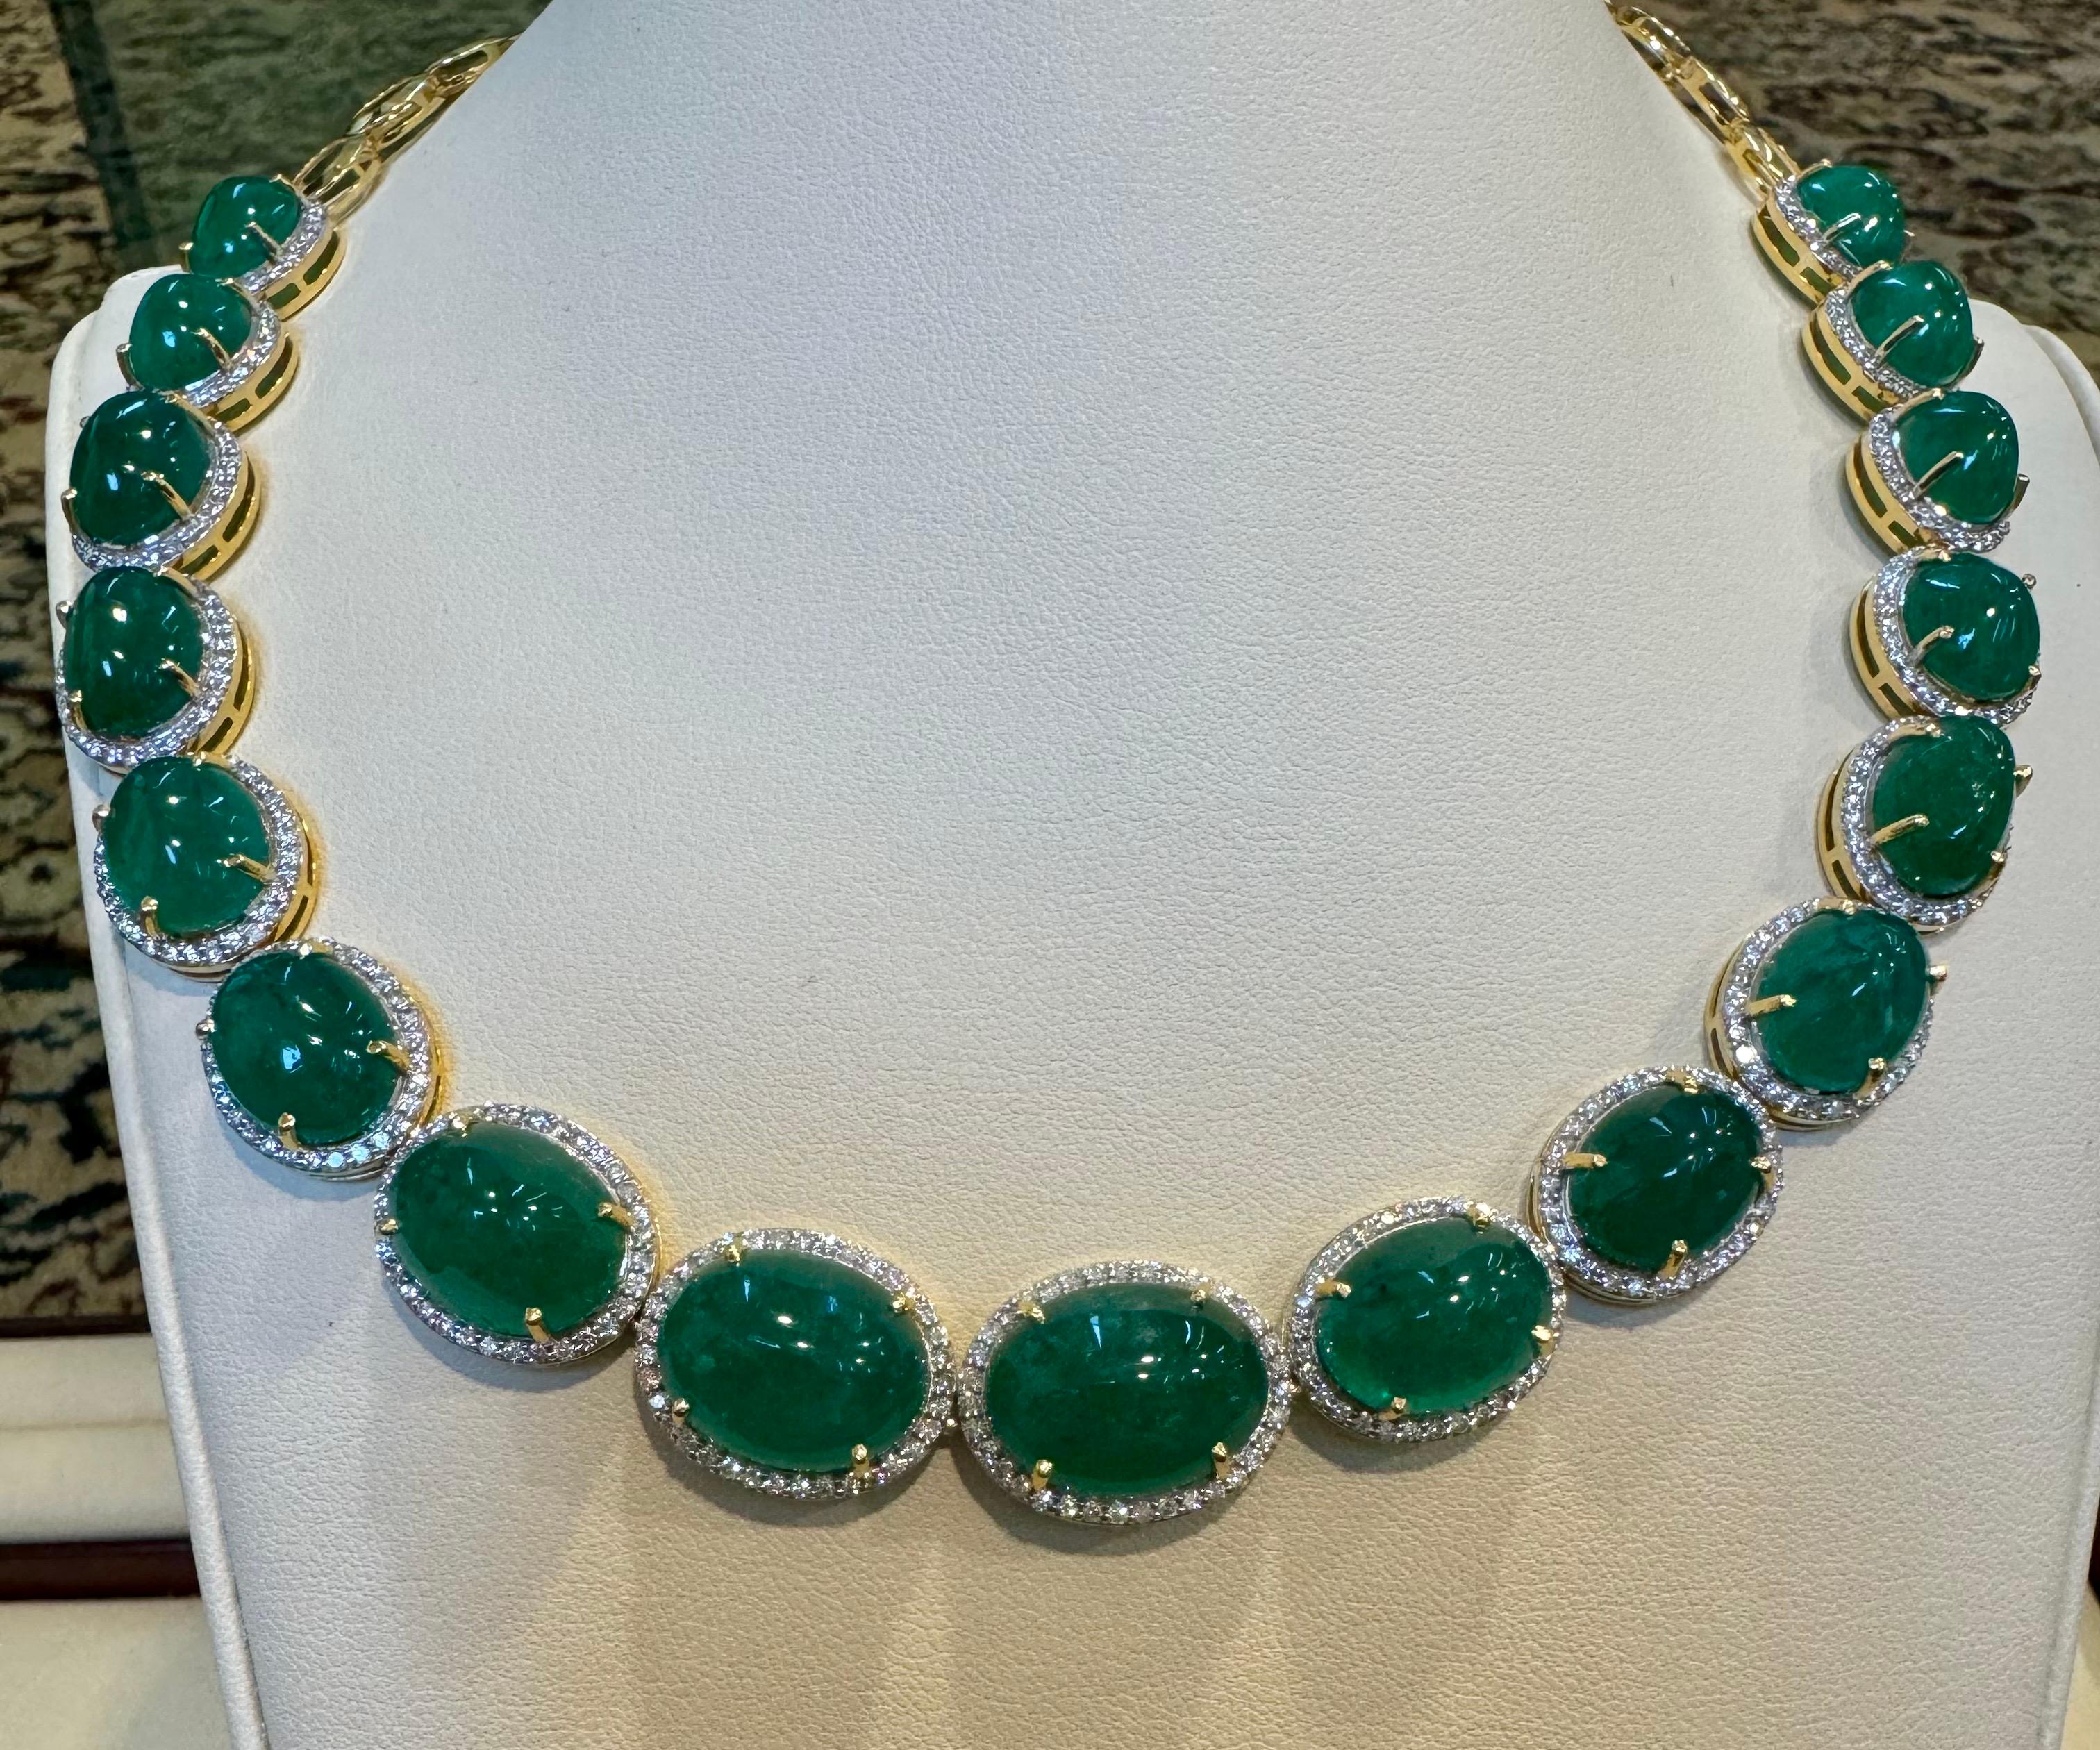 110 Ct Oval Natural Cabochon Emerald & Diamond Necklace, Earring Suite 14 K Gold For Sale 16